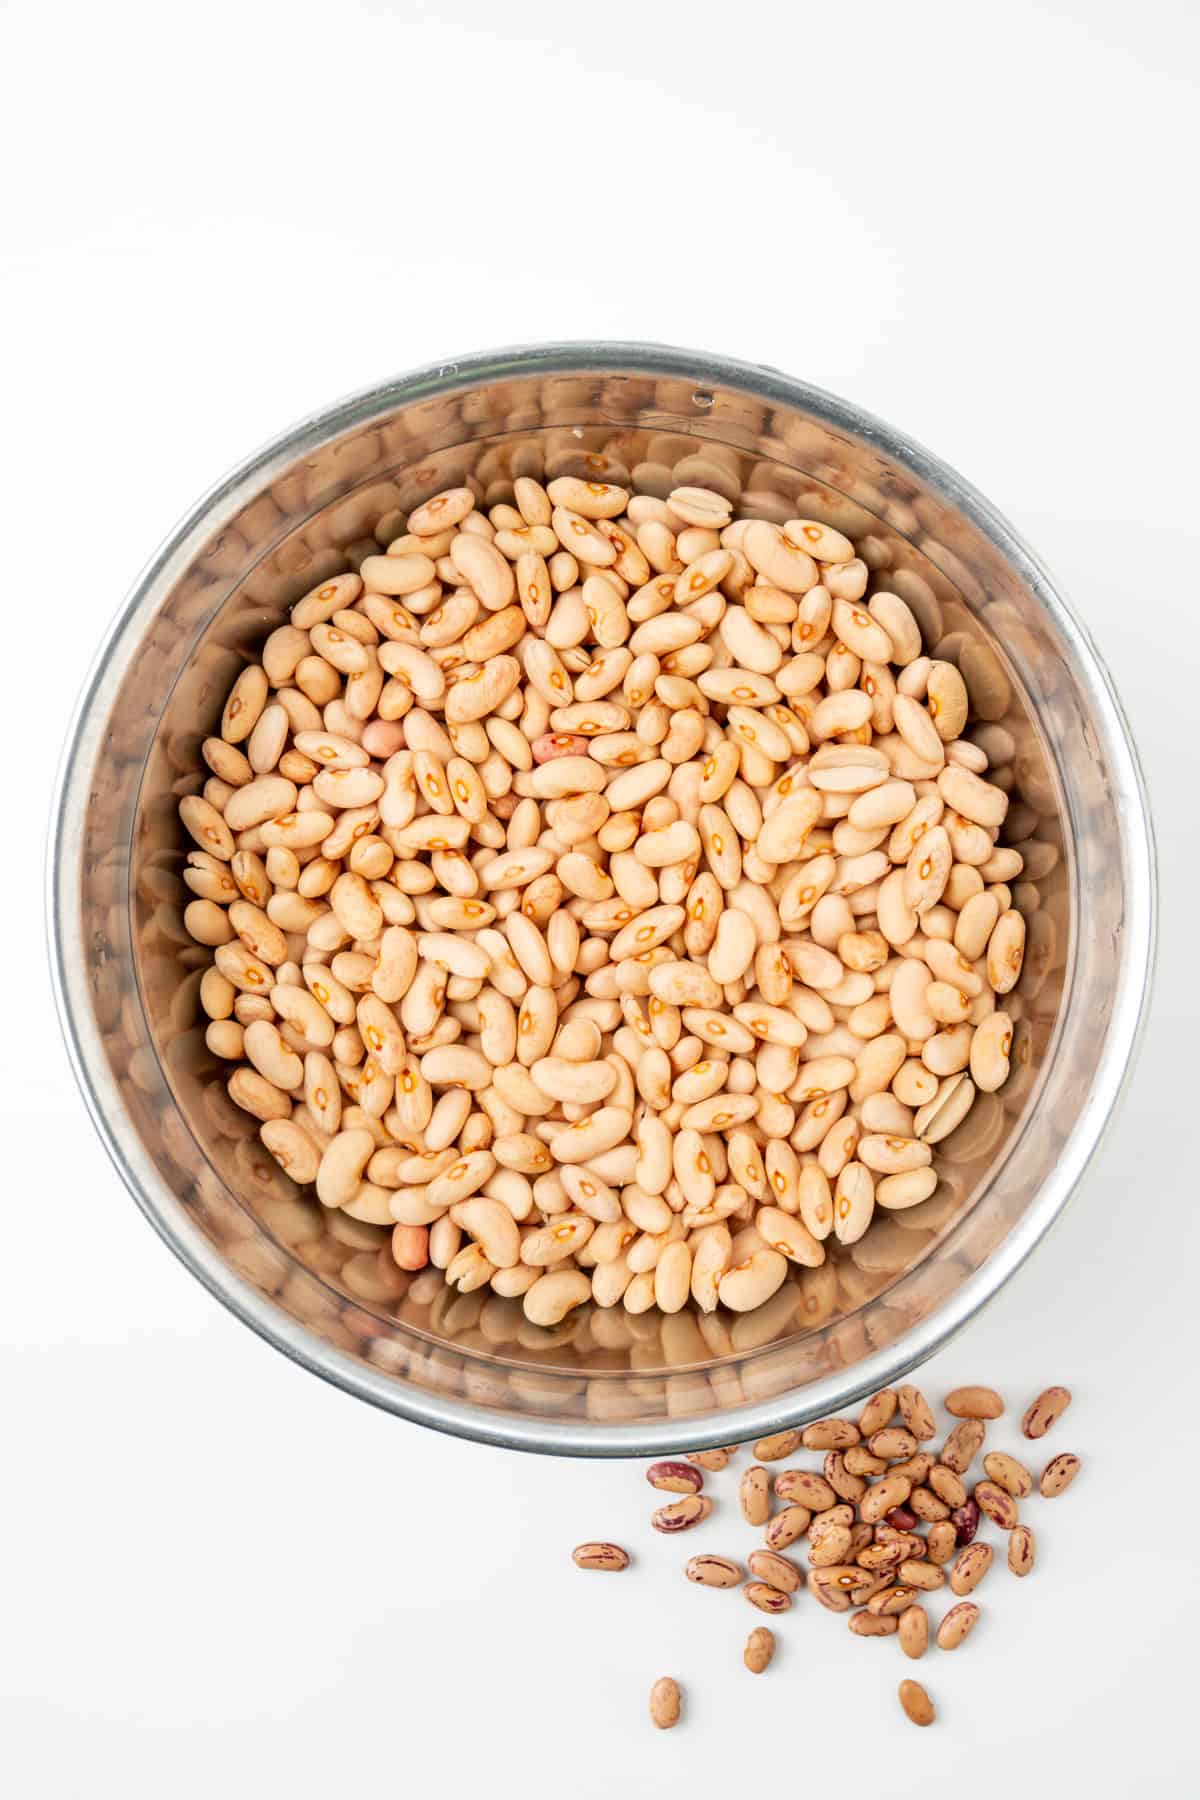 Pinto beans are lighter in colour and have almost doubled in size after soaking in water.